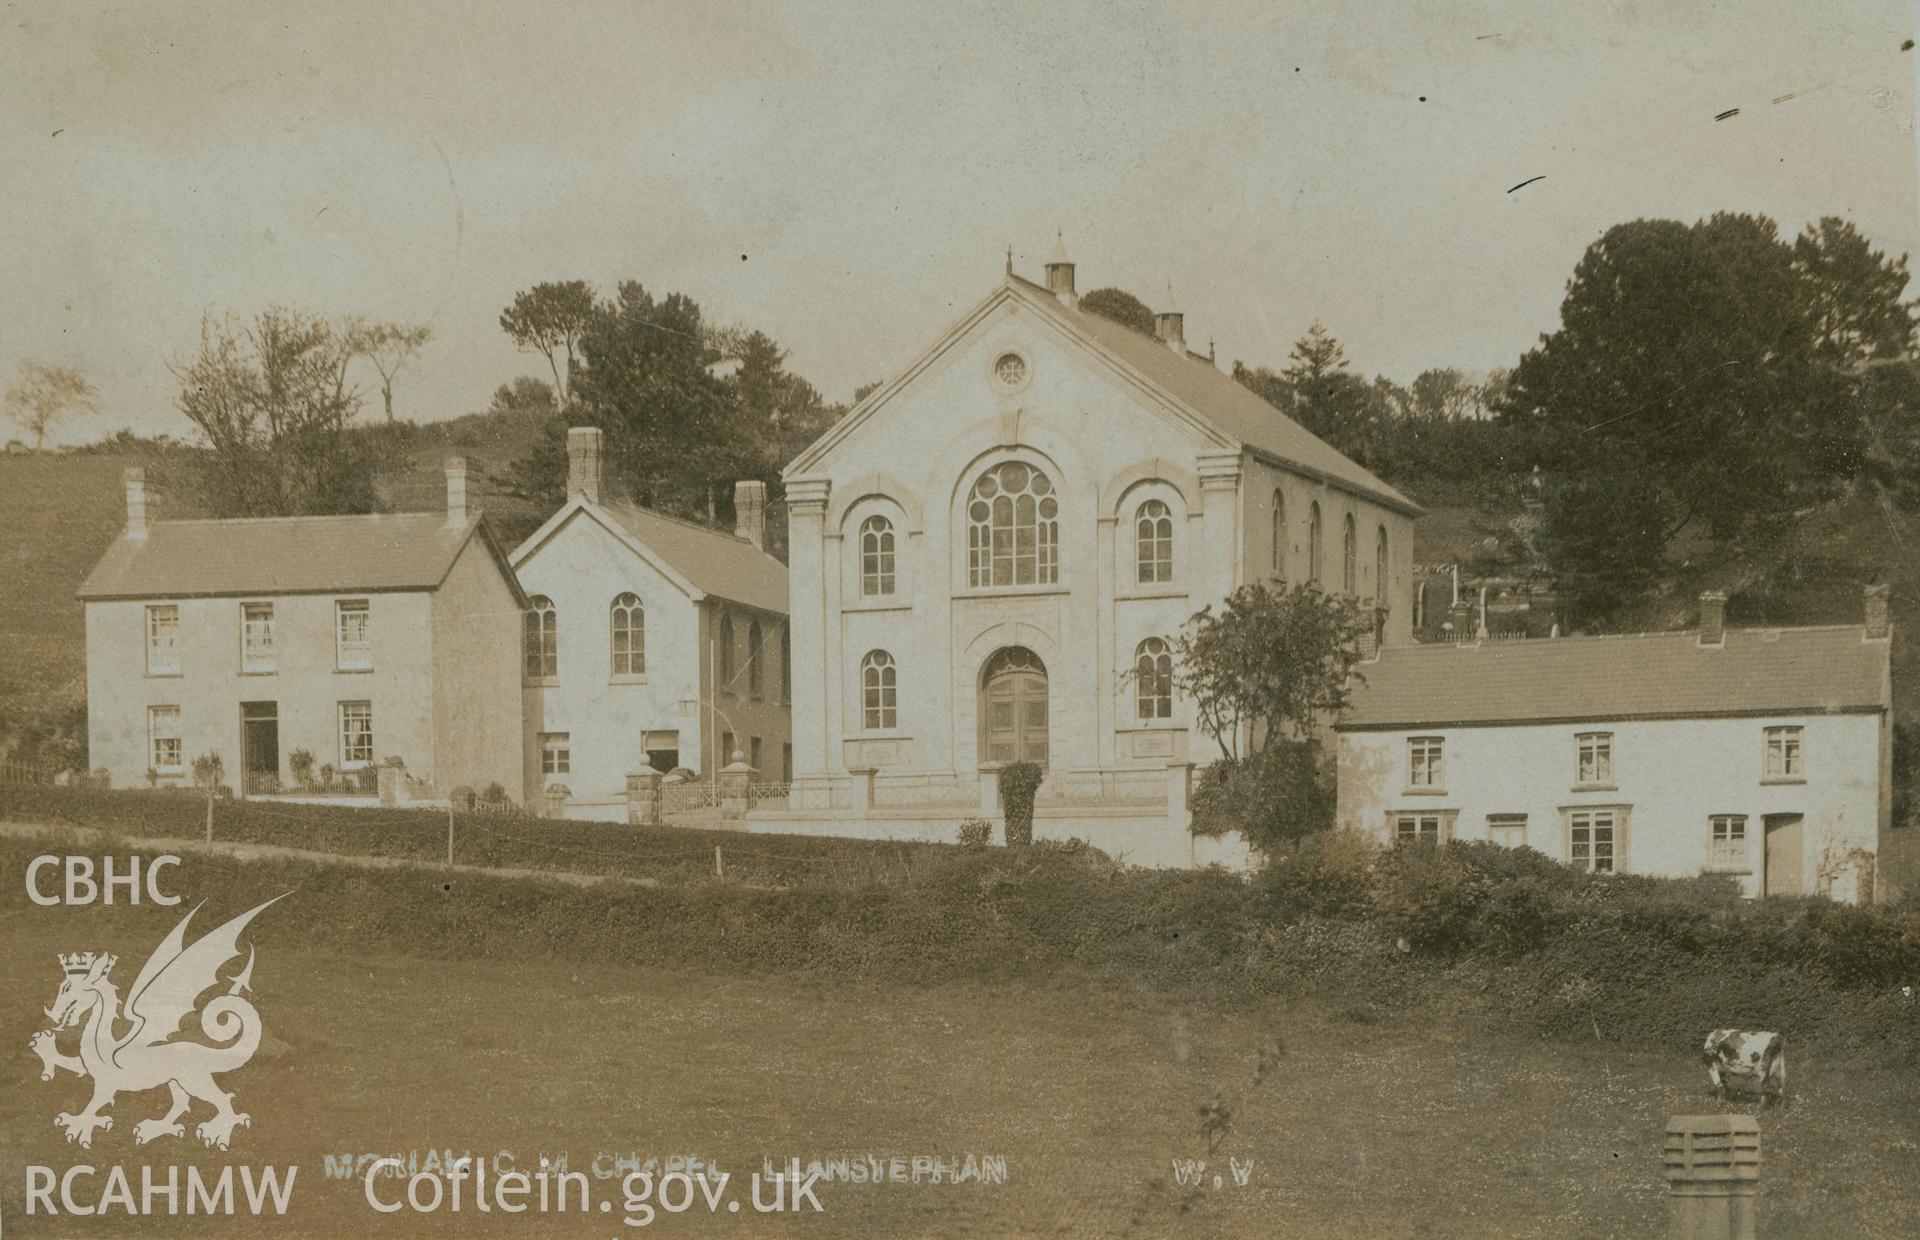 Digital copy of monochrome postcard showing exterior view of Moriah Calvinistic Methodist chapel, Llansteffan. Loaned for copying by Thomas Lloyd.